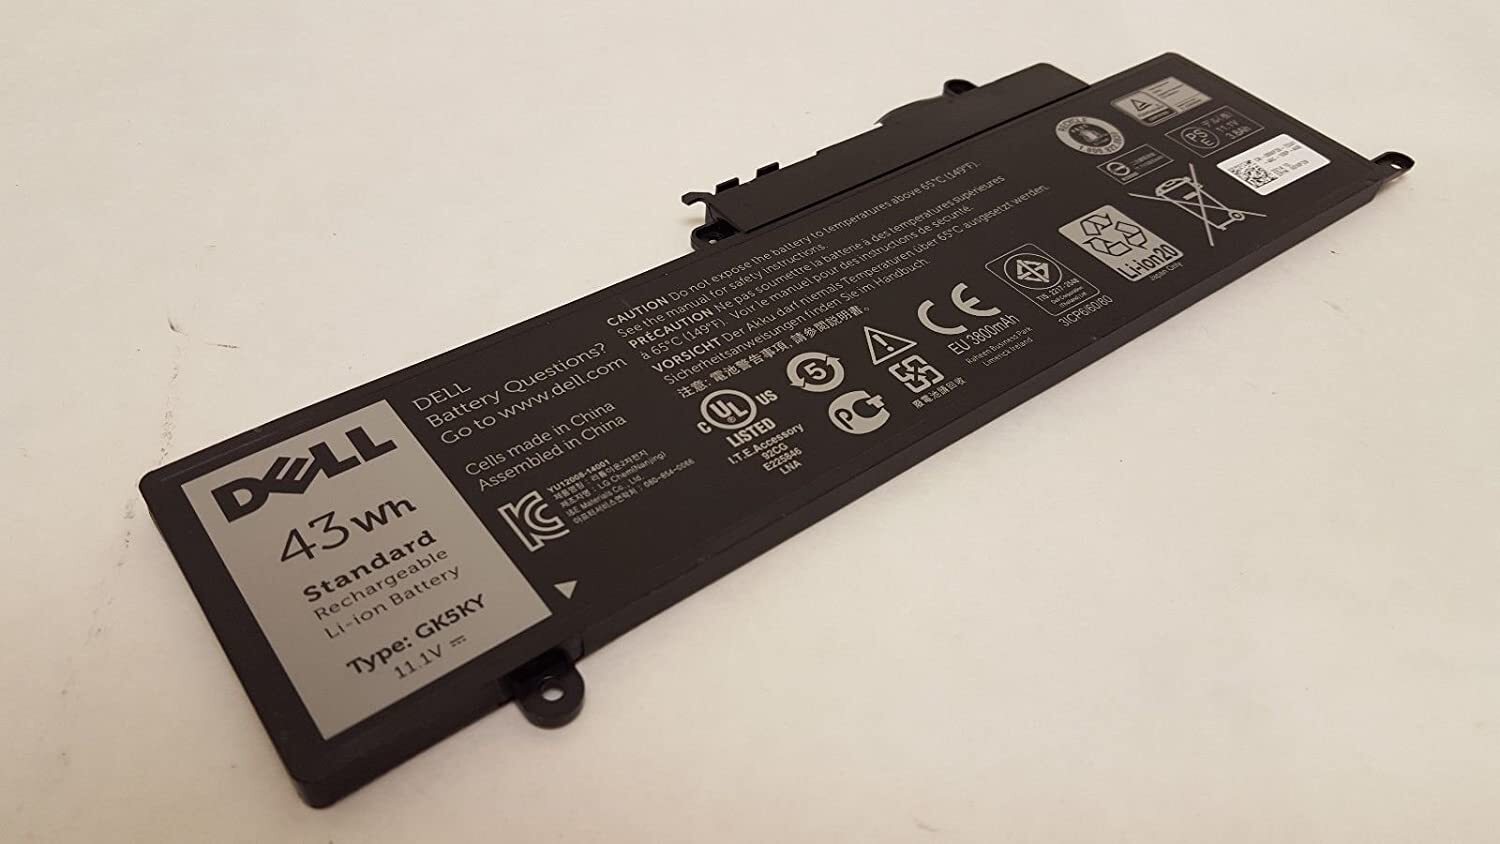 Dell Easyget Laptop Battery 0WF28 GK5KY 11.1V 43Wh for Inspiron P20T 11-3147 Series and 13 7347 Laptop 4K8YH 00WF28 04K8YH-M000000000473 www.mysocially.com